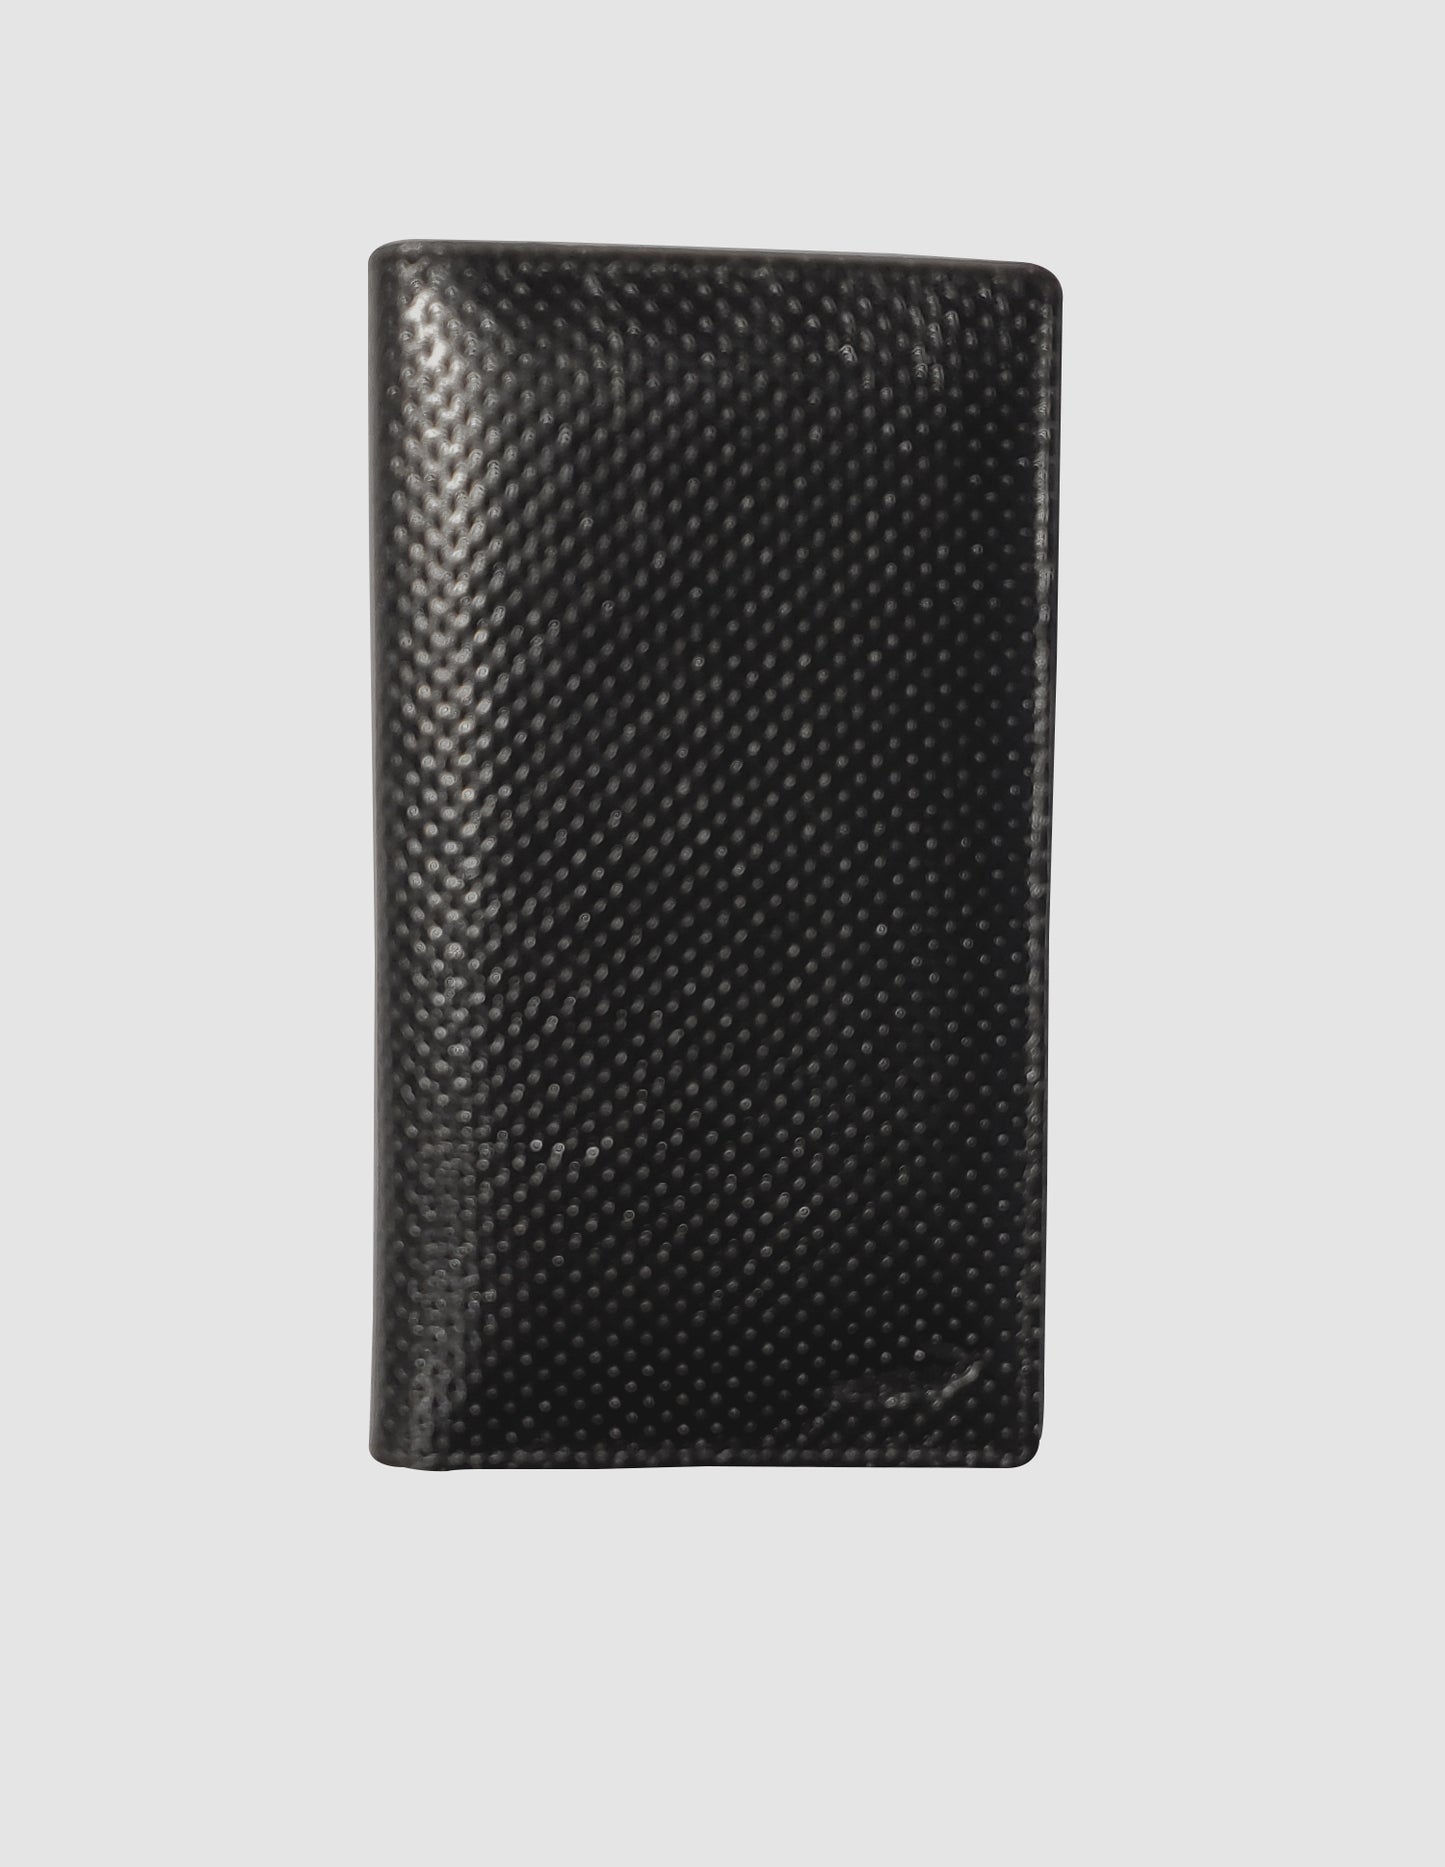 Black Leather Long Wallet with perforated finish